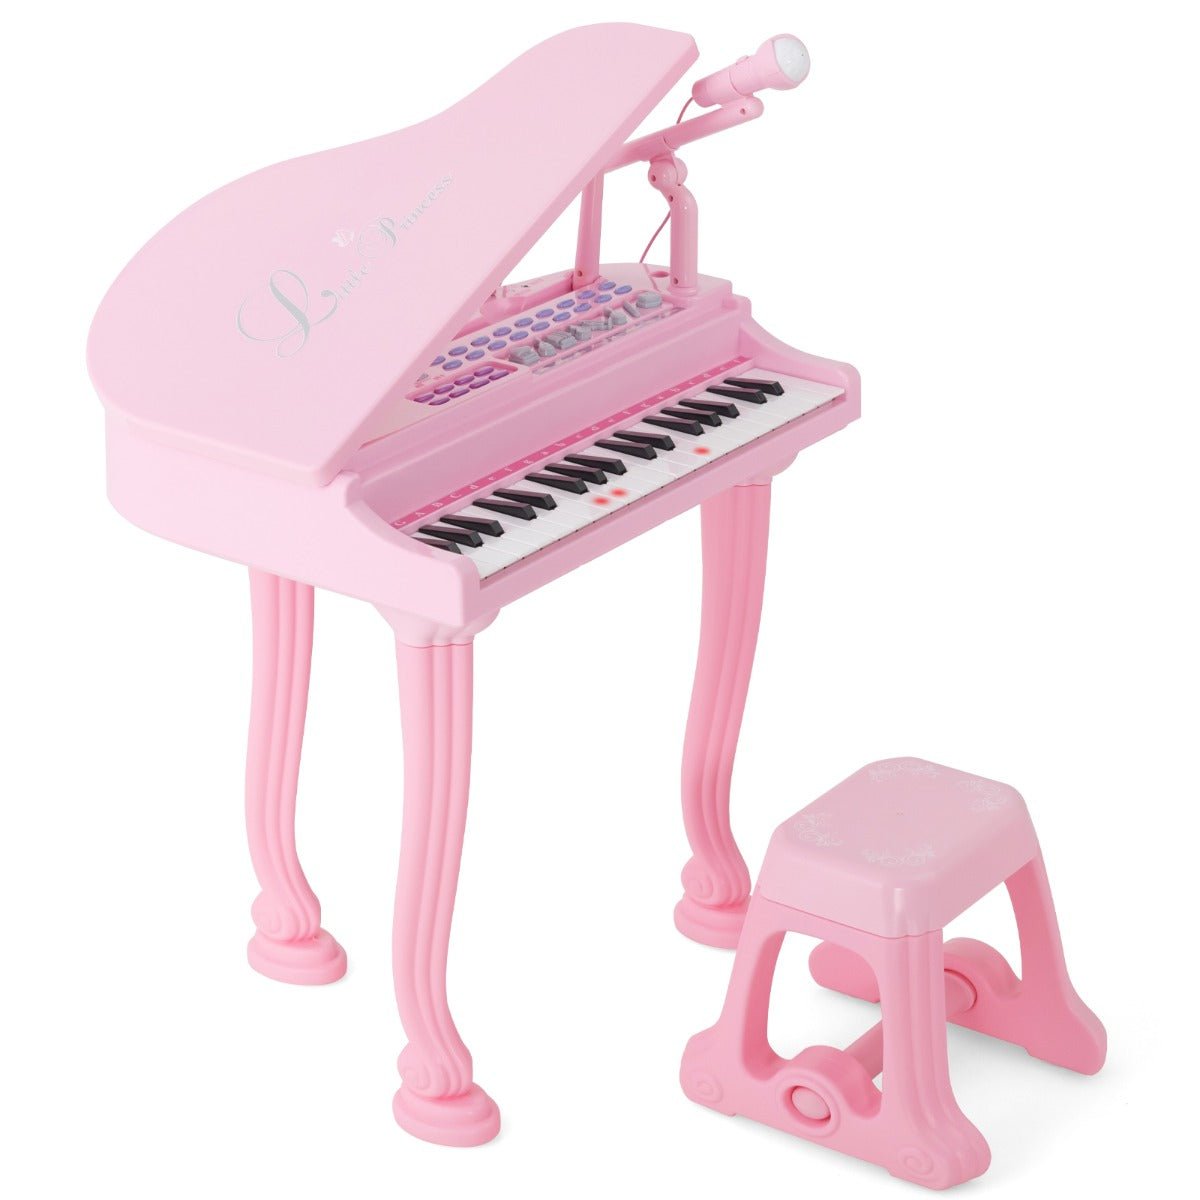 Buy 37 Keys Kids Portable Piano Keyboard with Stool and Microphone Pink